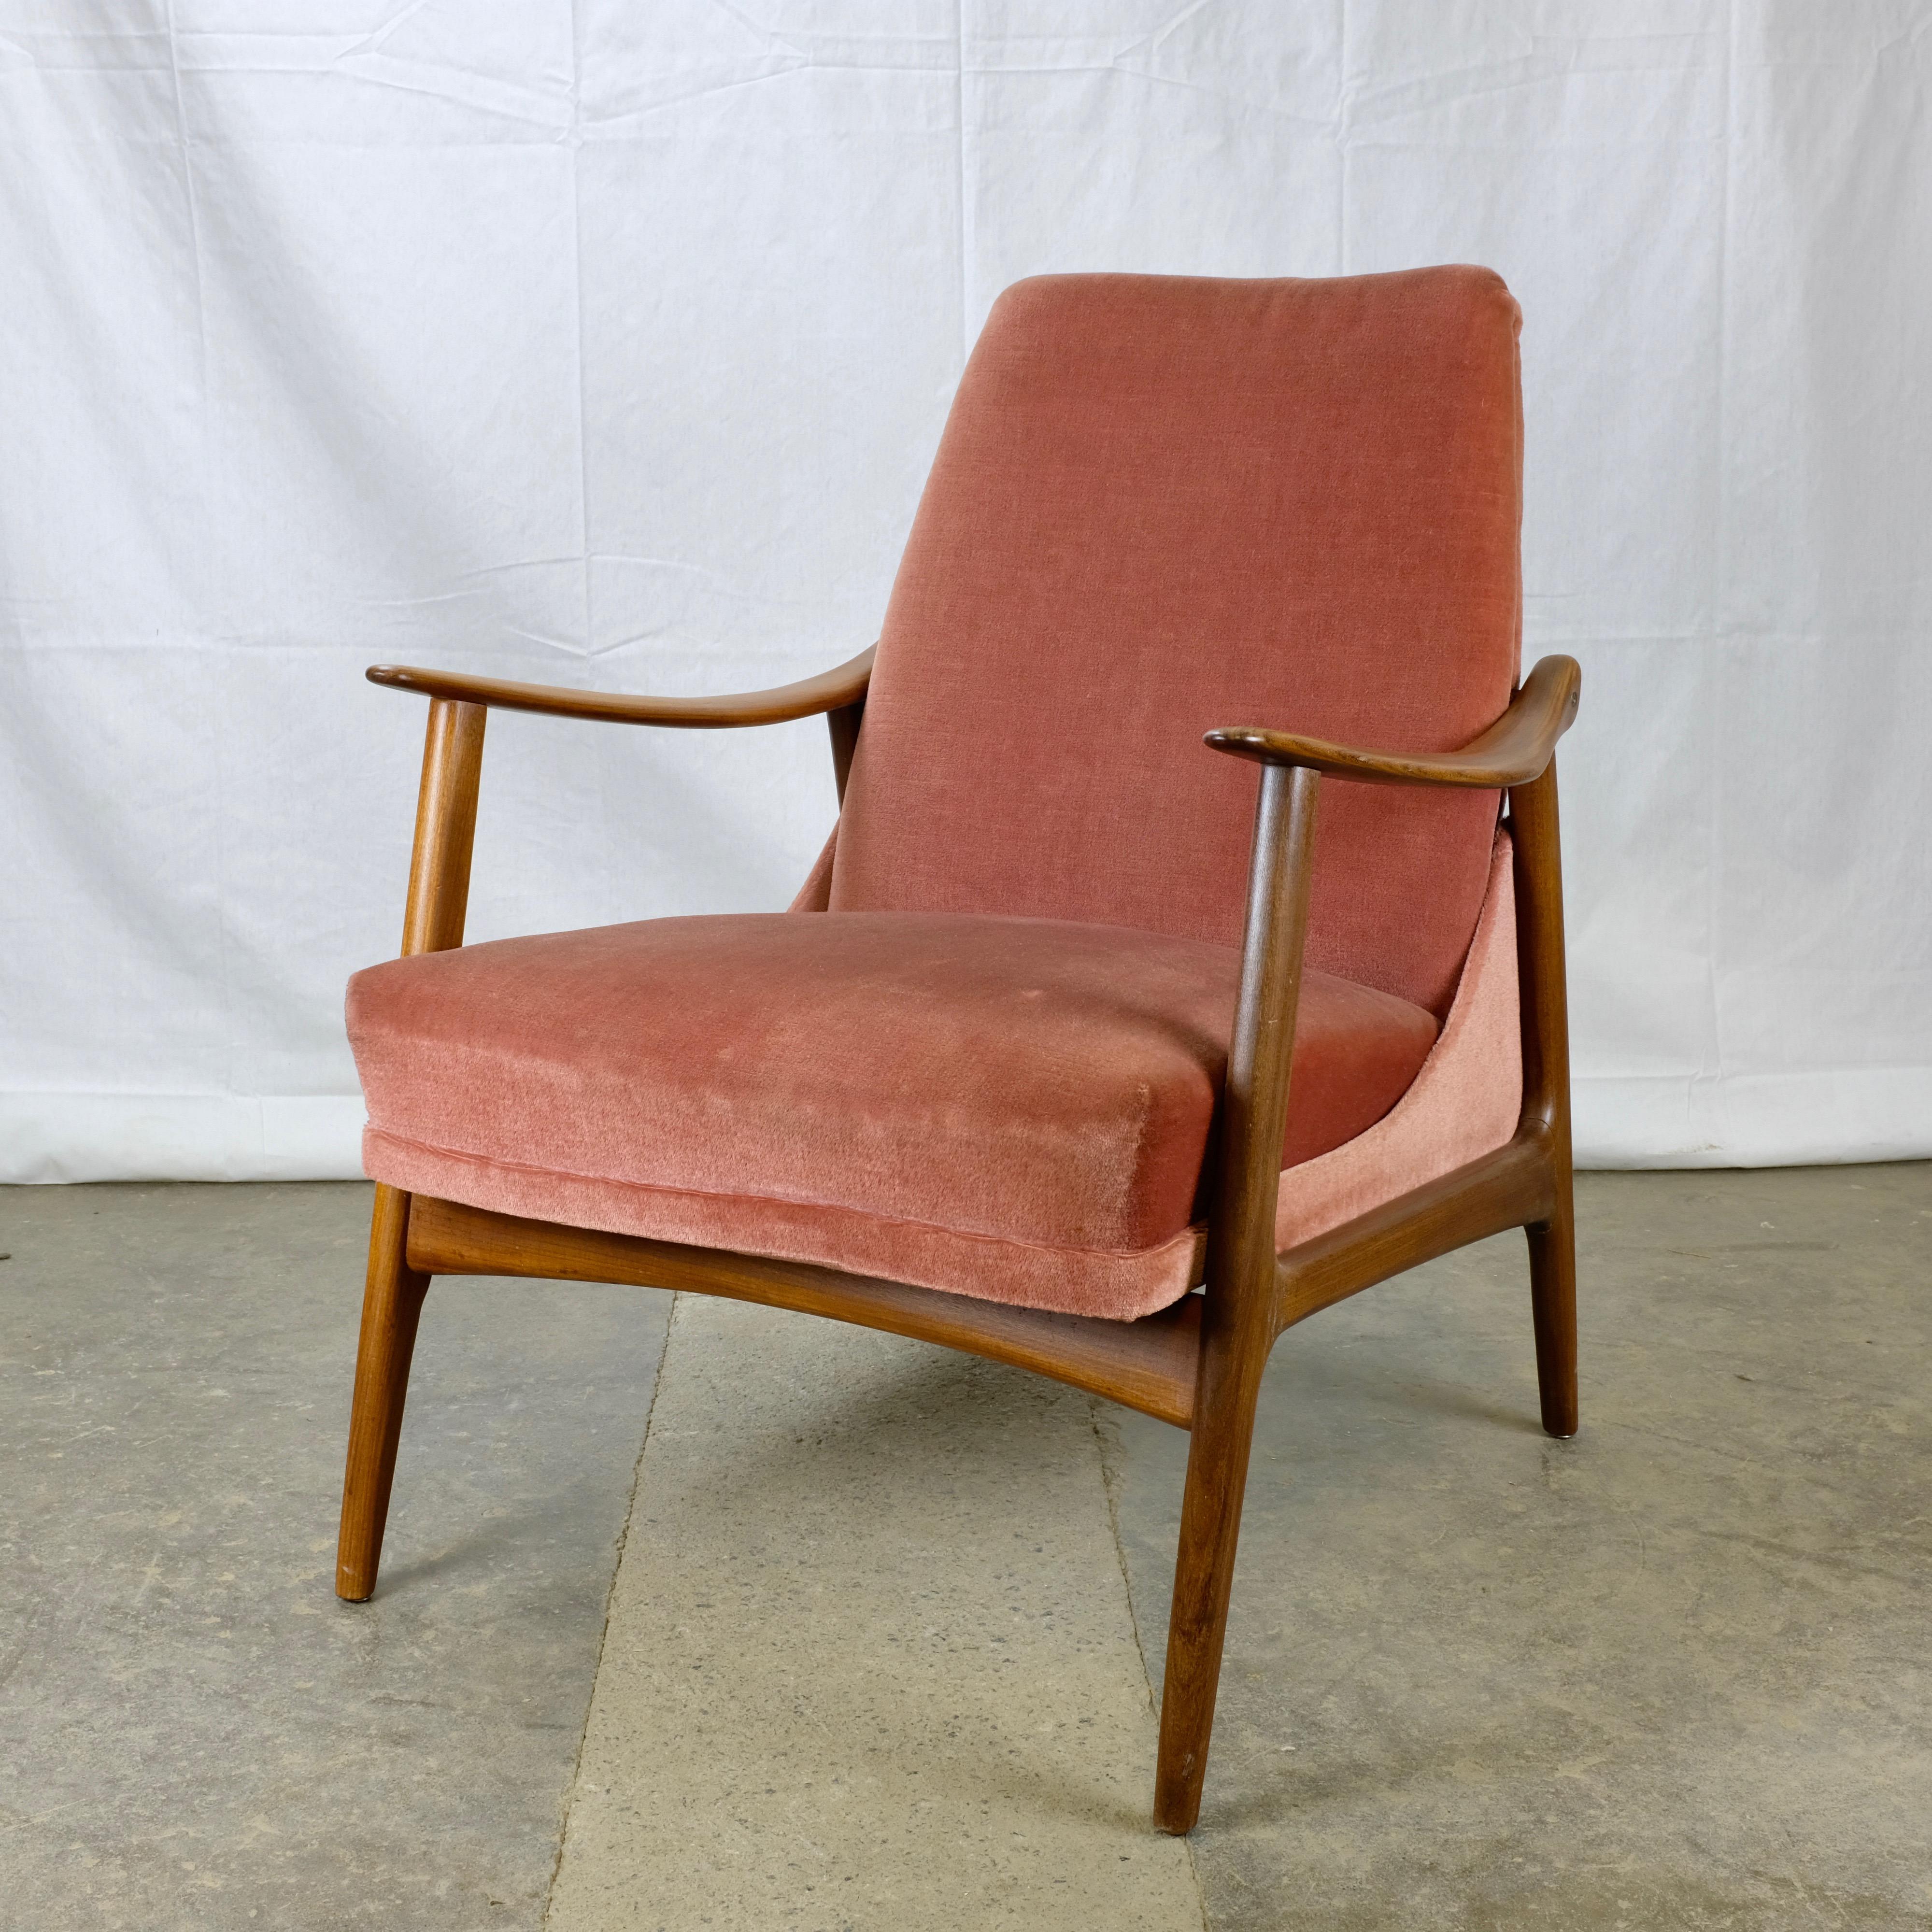 Danish teak armchair with solid teak frame and seat and back upholstered in a dusty rose velour.

The gracefully sloping armrests and angled legs give the chair a dynamic posture typical of Danish Modern furniture, while the soft velour upholstery